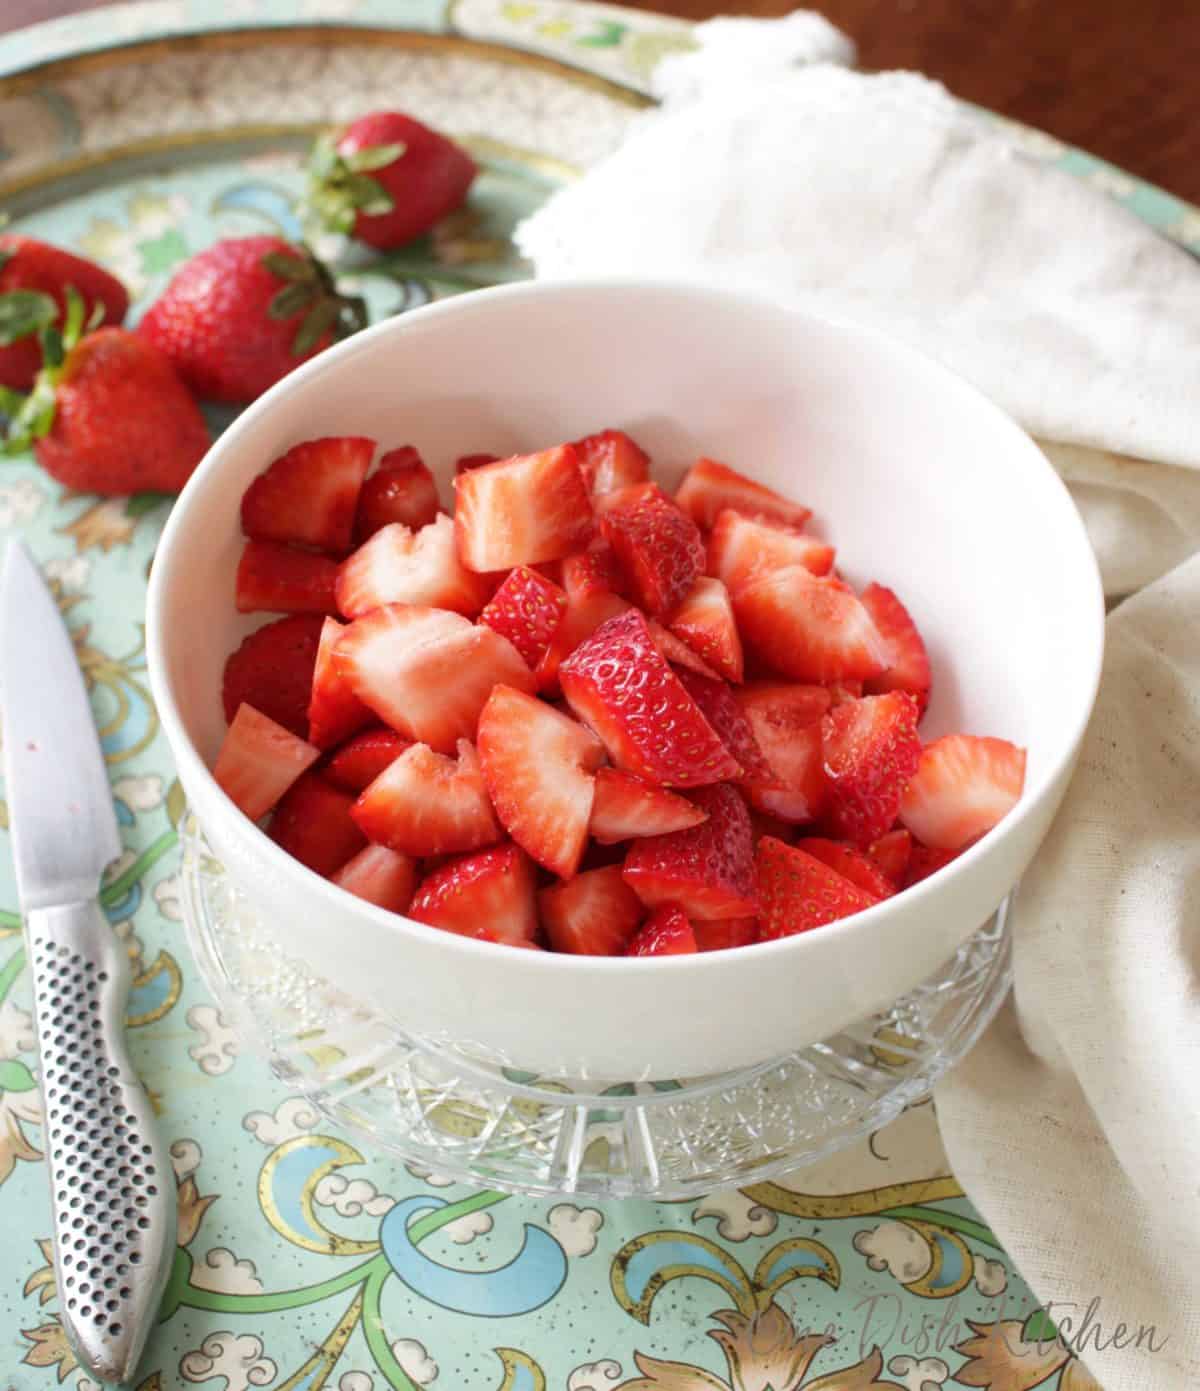 A bowl of fresh sliced strawberries plated next to a knife and scattered strawberries.